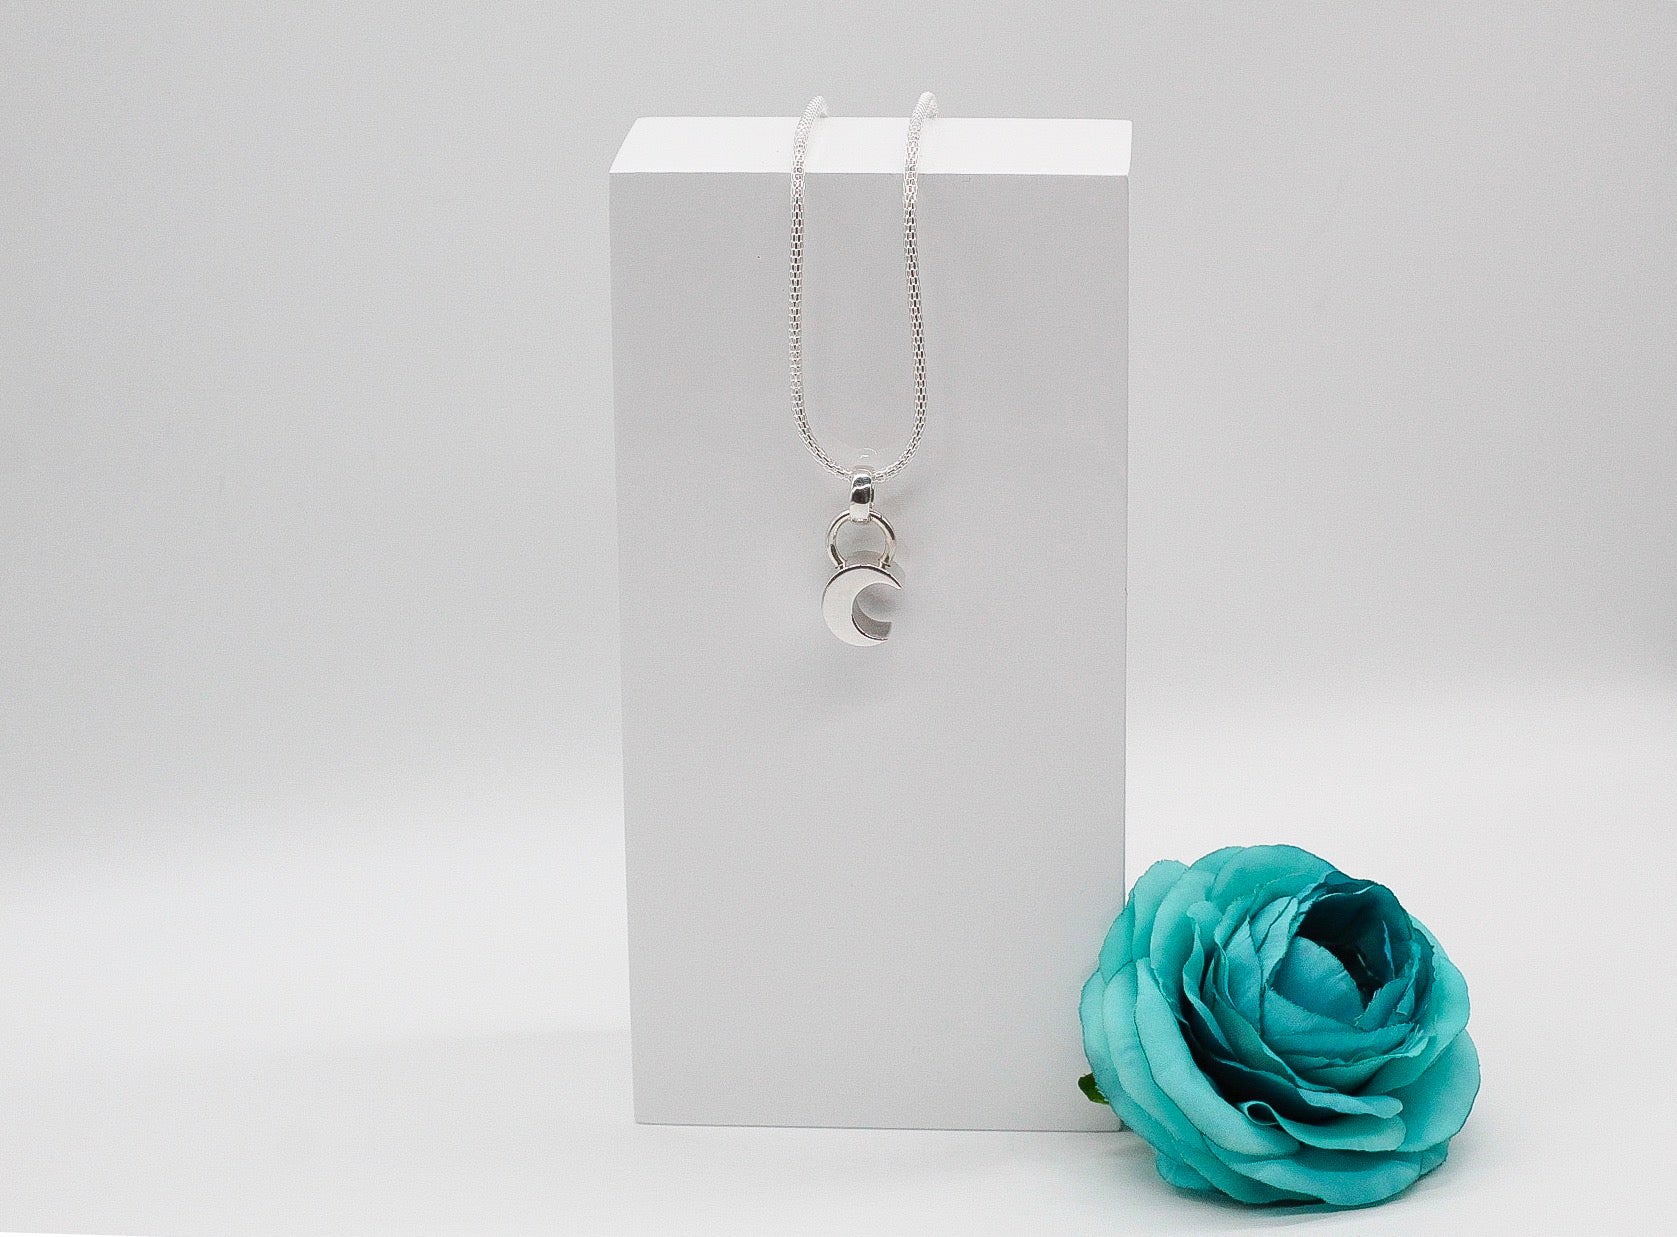 3D Moon Sterling Silver Necklace